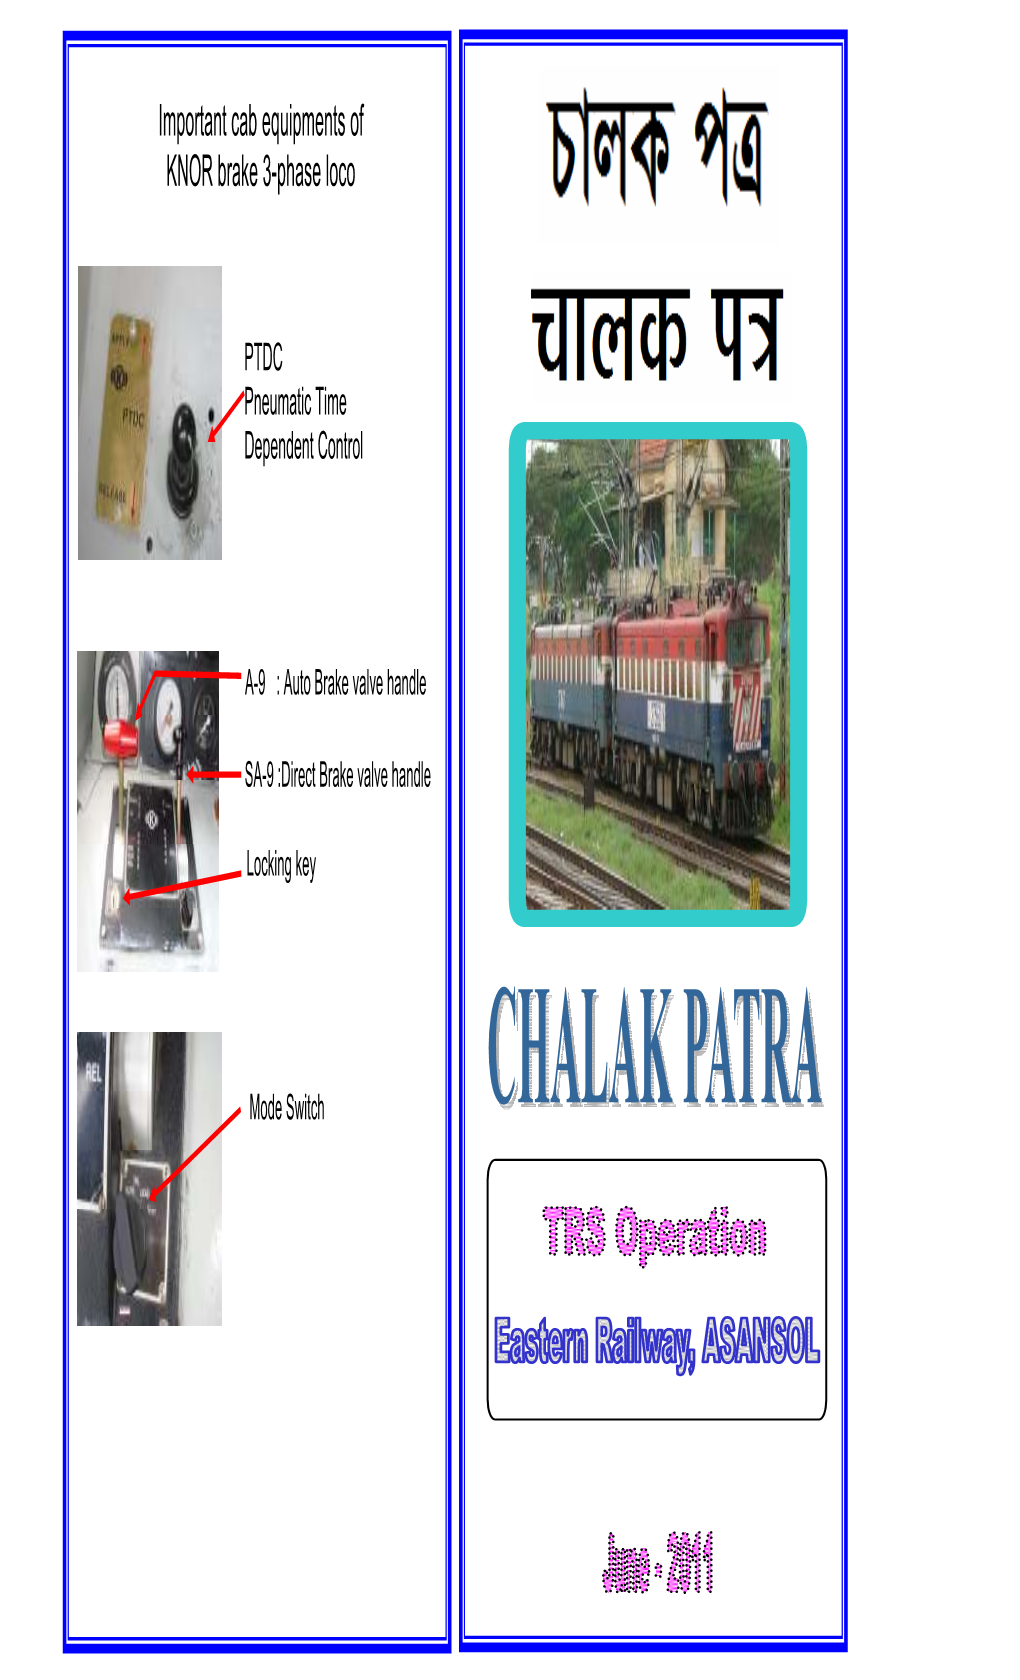 Important Cab Equipments of KNOR Brake 3-Phase Loco